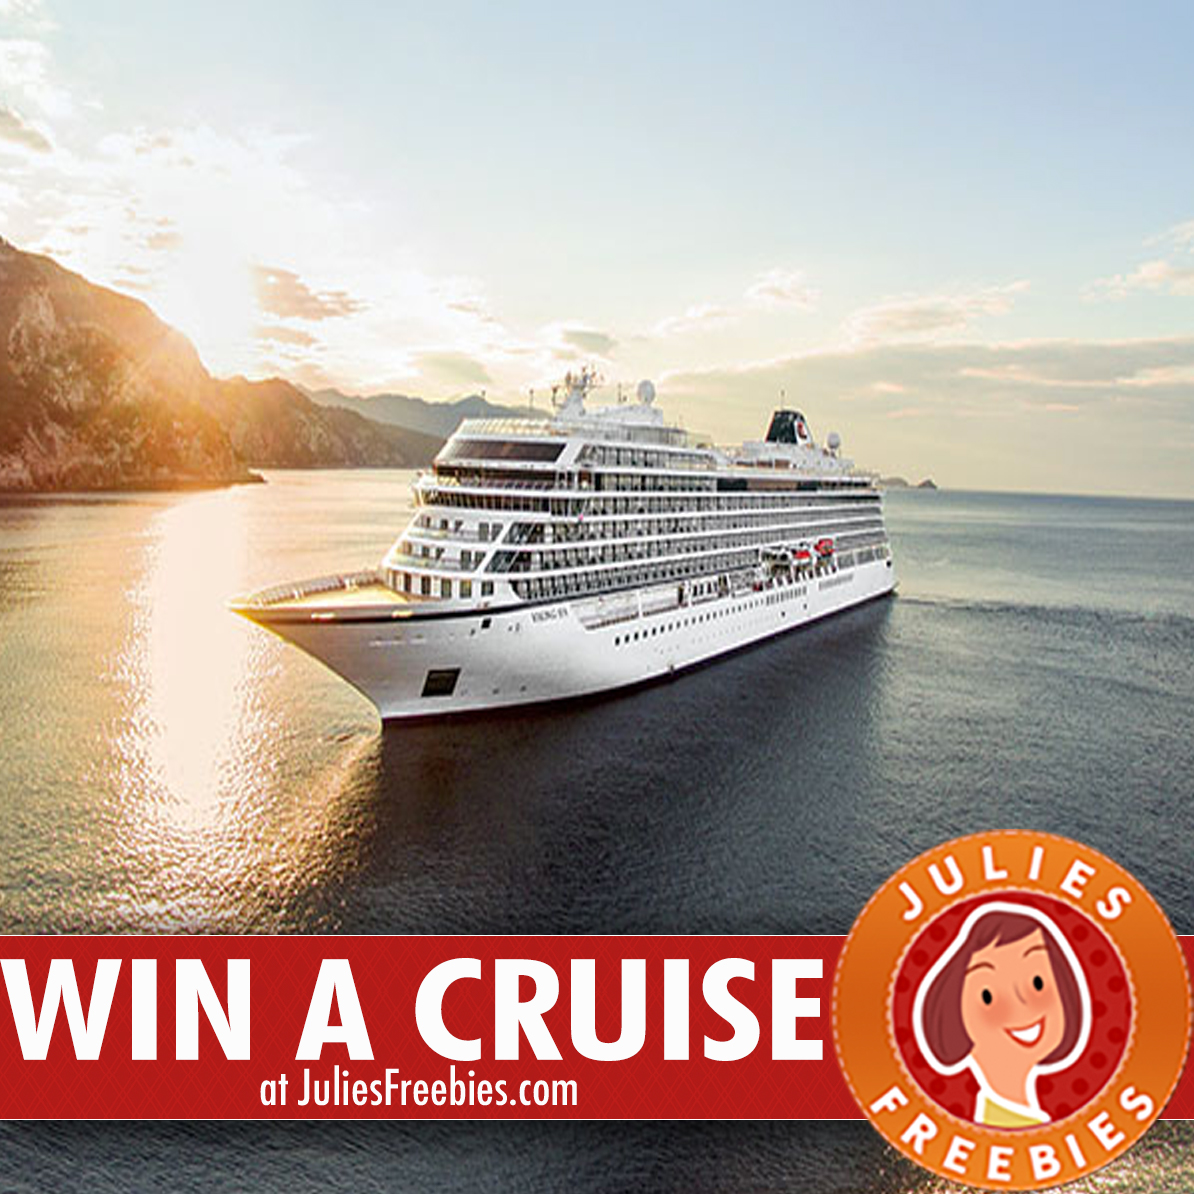 Adventure of Your Life Cruise Sweepstakes Julie's Freebies